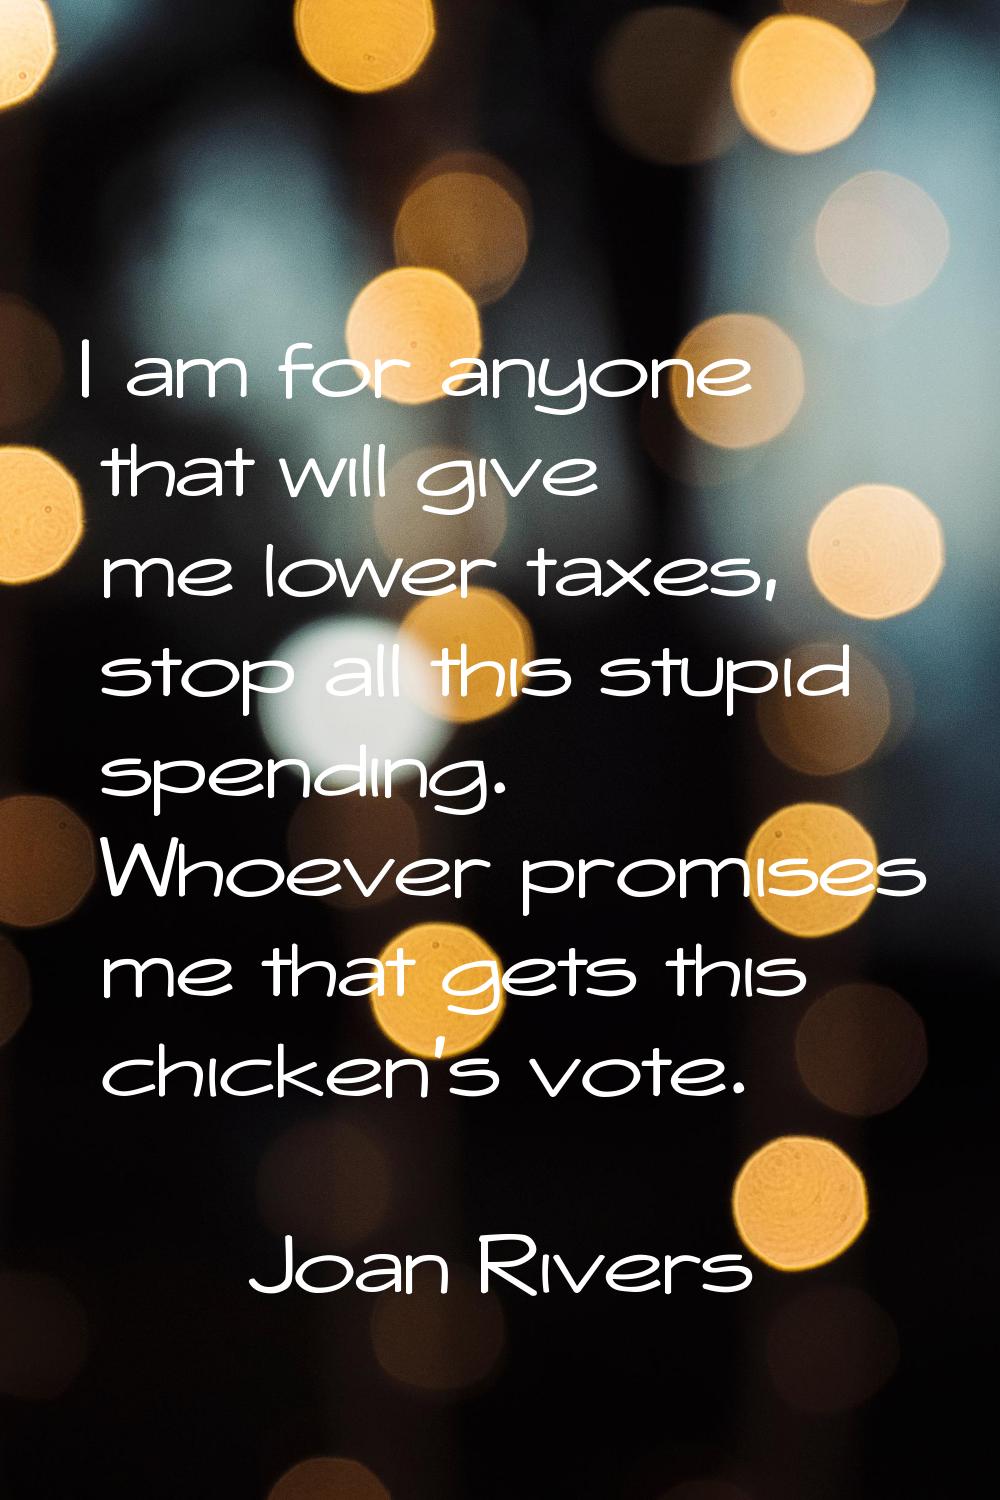 I am for anyone that will give me lower taxes, stop all this stupid spending. Whoever promises me t